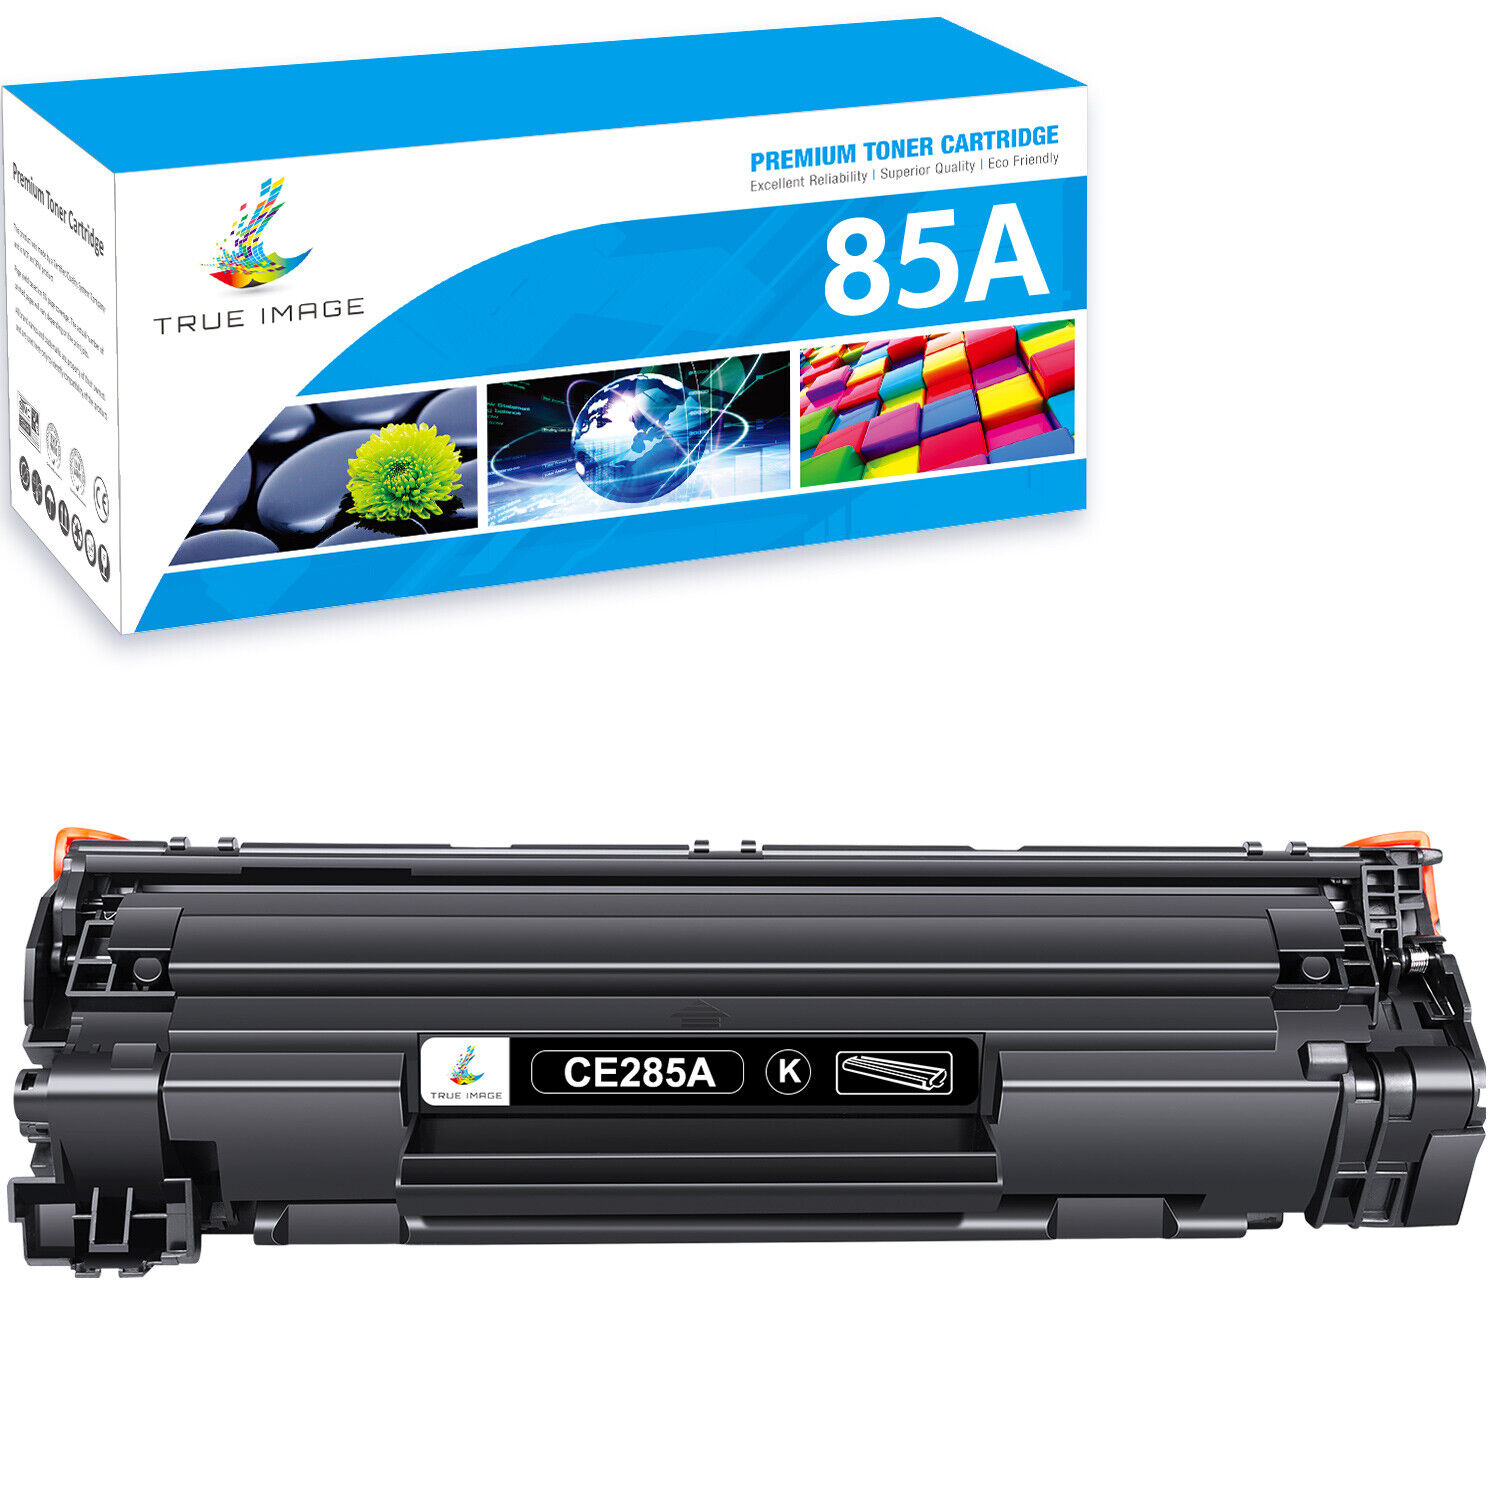 1 Pack High Yield CE285A Toner Cartridge for HP 85A LaserJet P1102W M1217nfw MFP